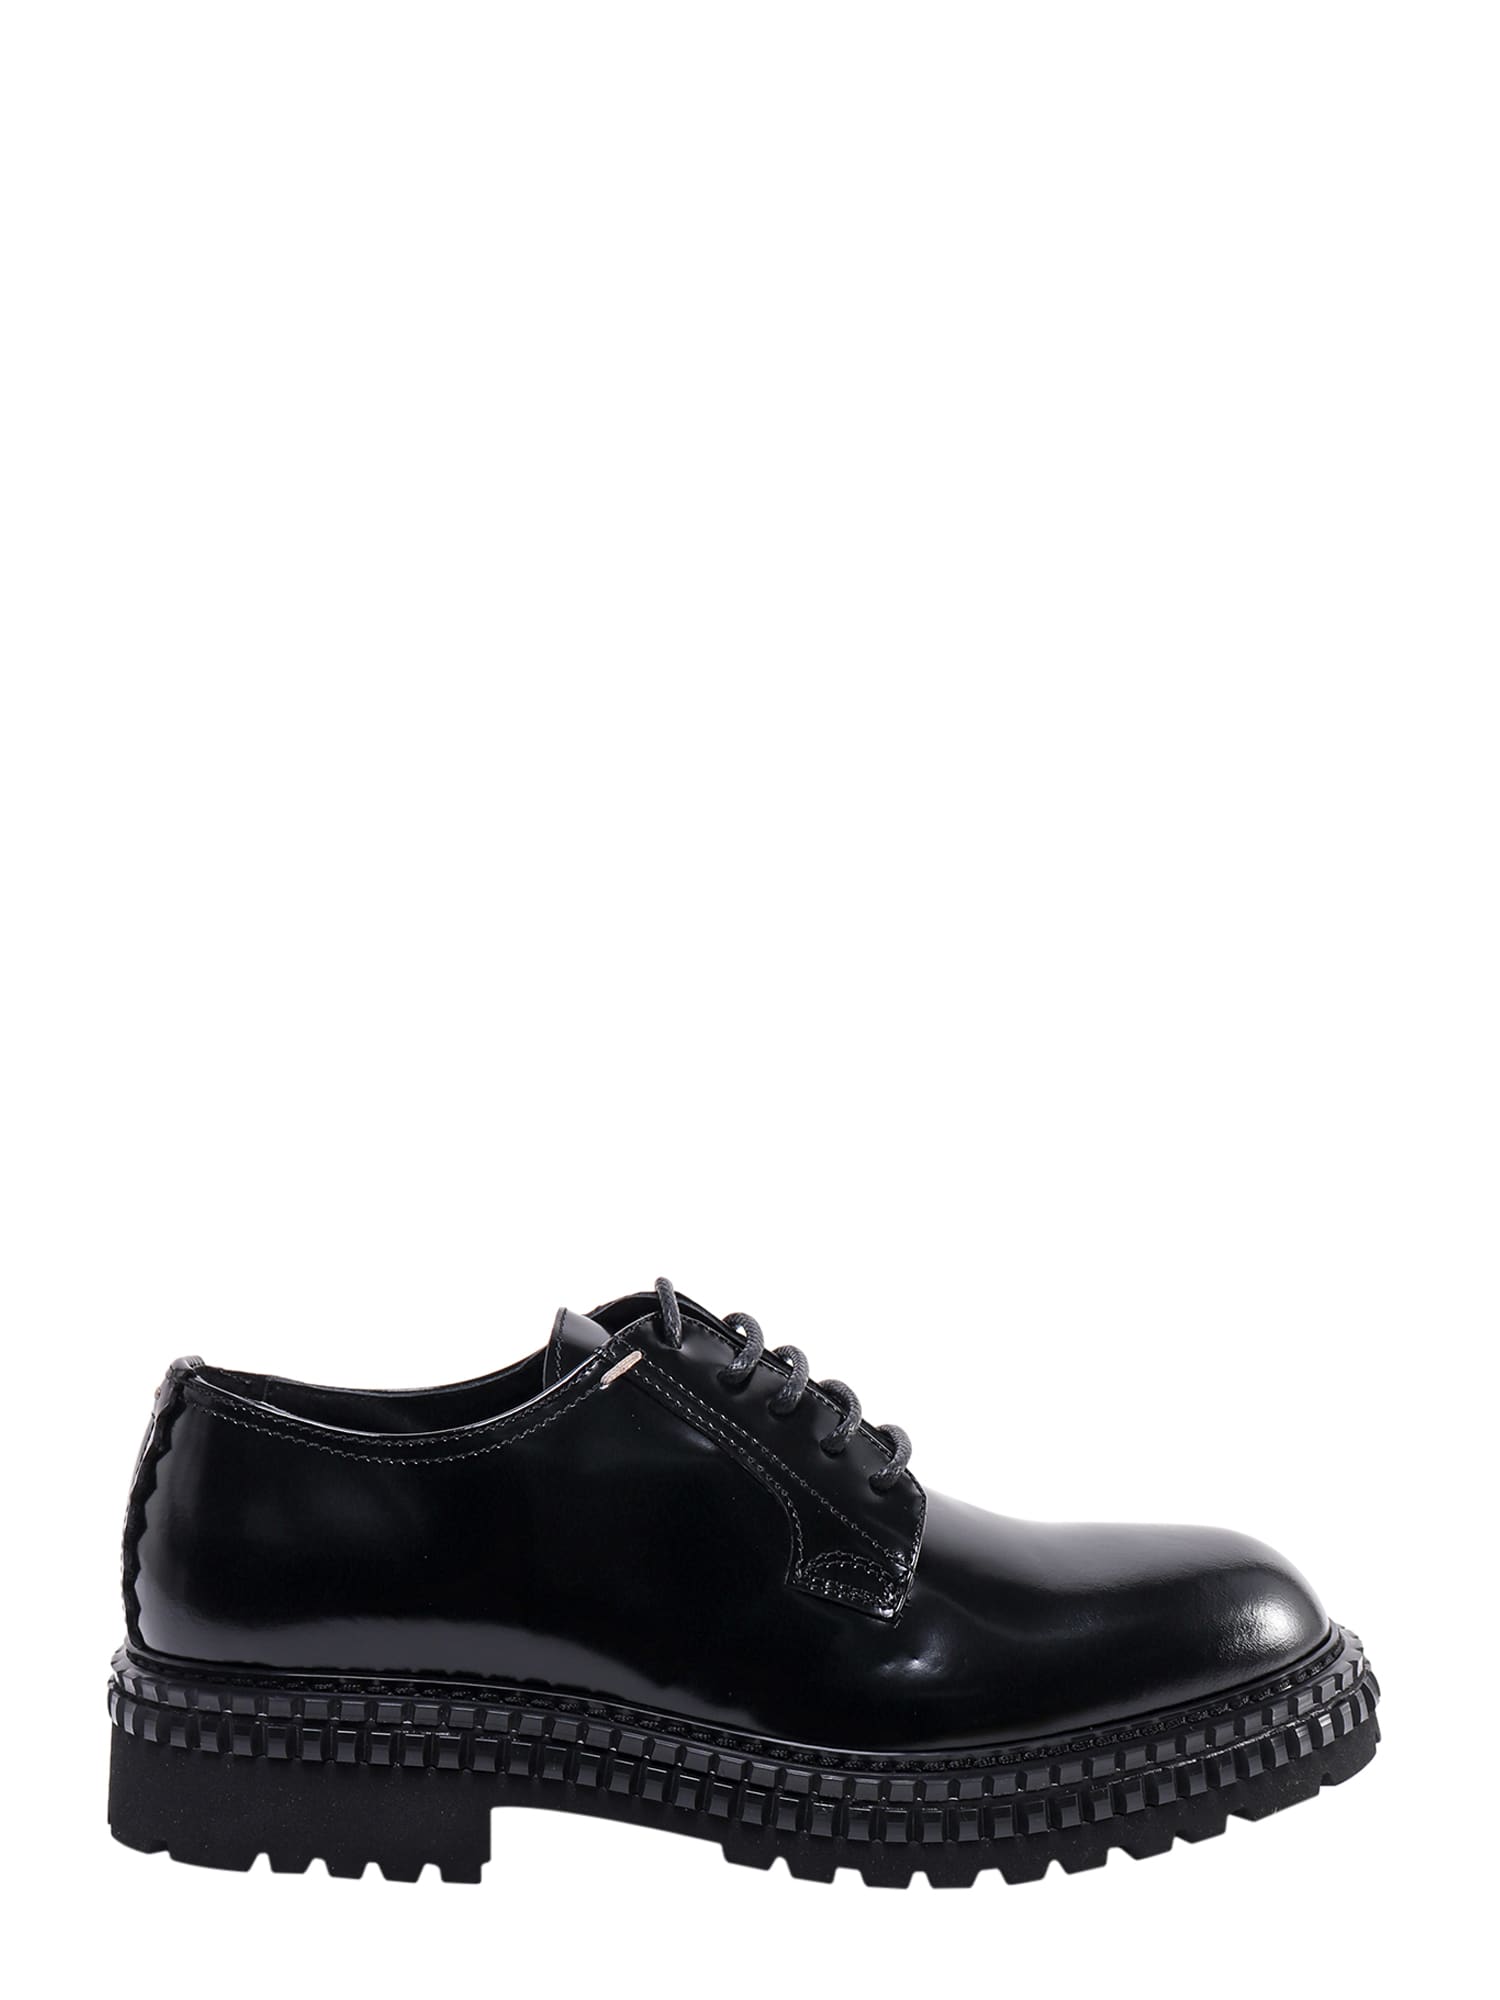 The Antipode Willi 060 Lace-up Shoe